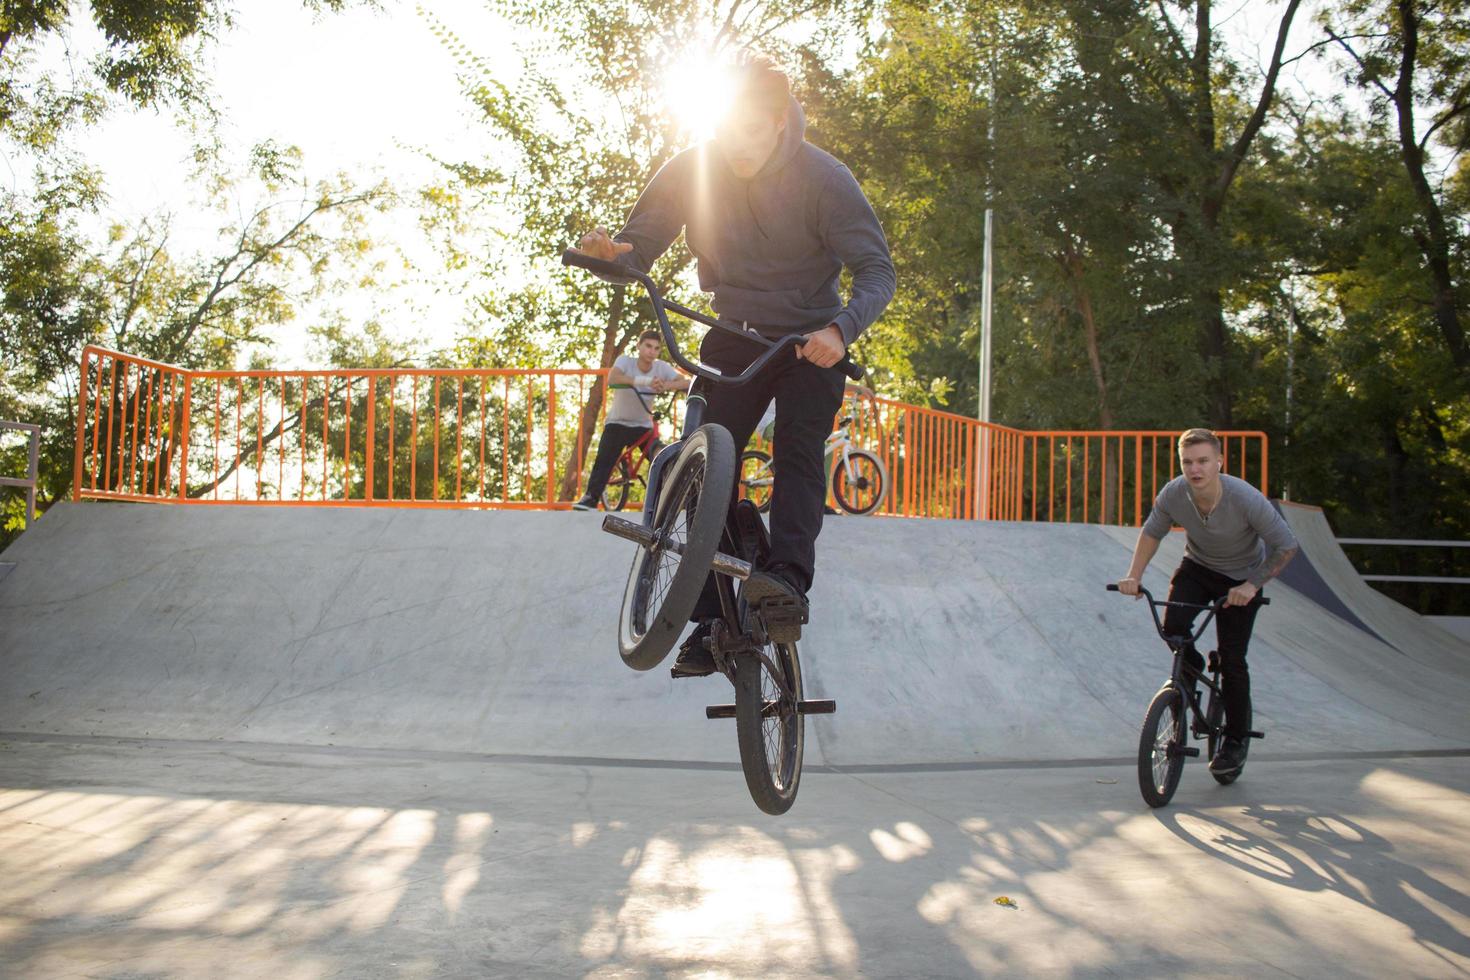 Group of young people with bmx bikes in skate plaza, stunt bicycle riders in skatepark photo